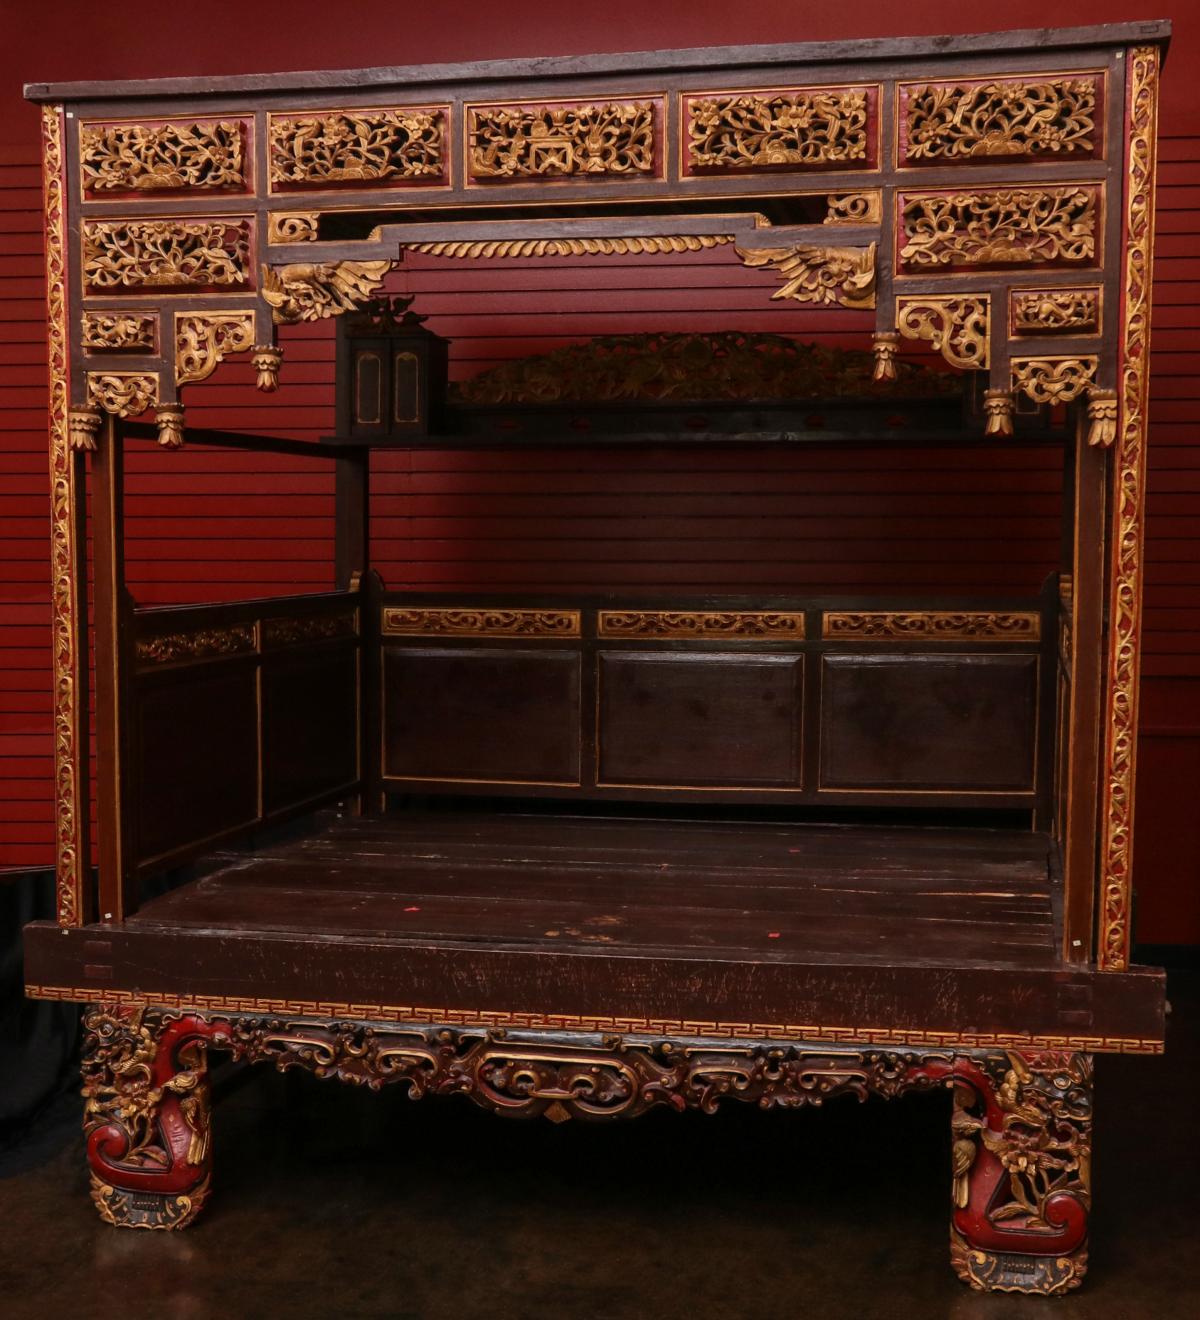 AN ELABORATE HEAVILY CARVED 19TH C. CHINESE WEDDING BED